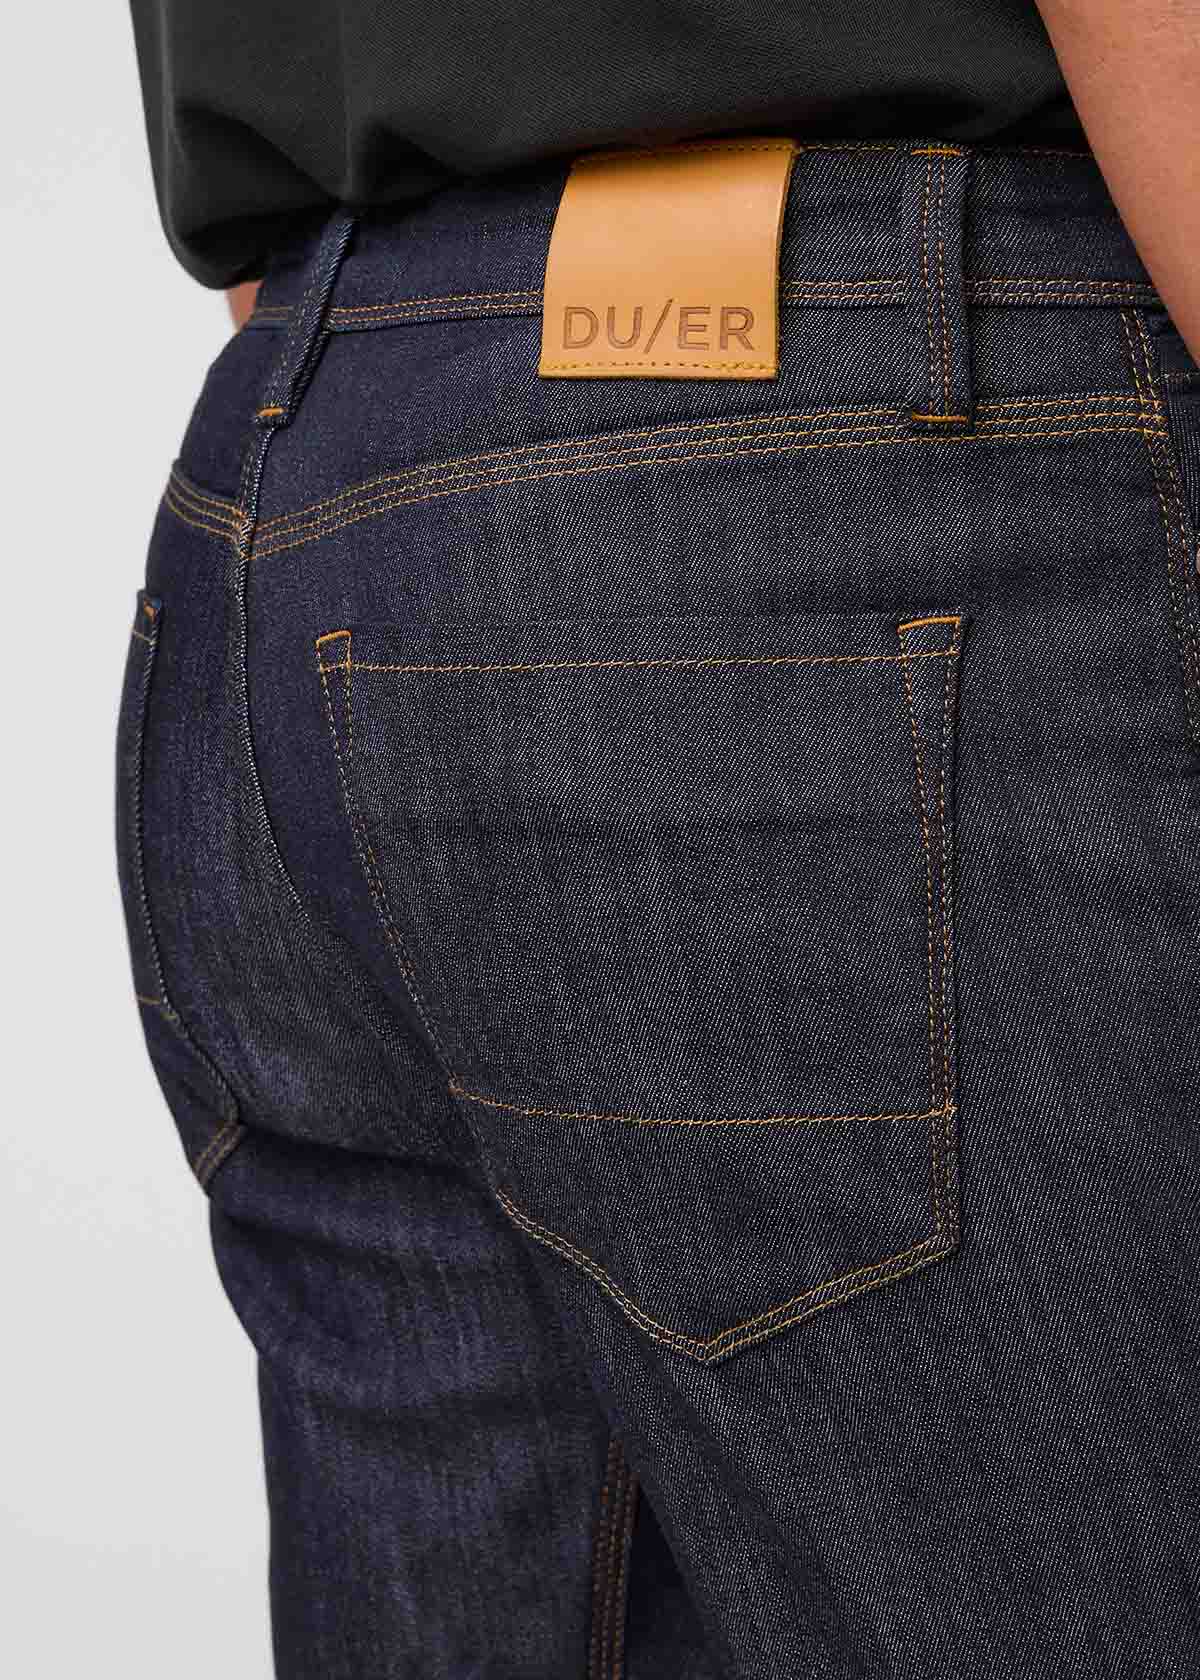 Find Mens 6 pocket jeans factory by Fc jeans near me